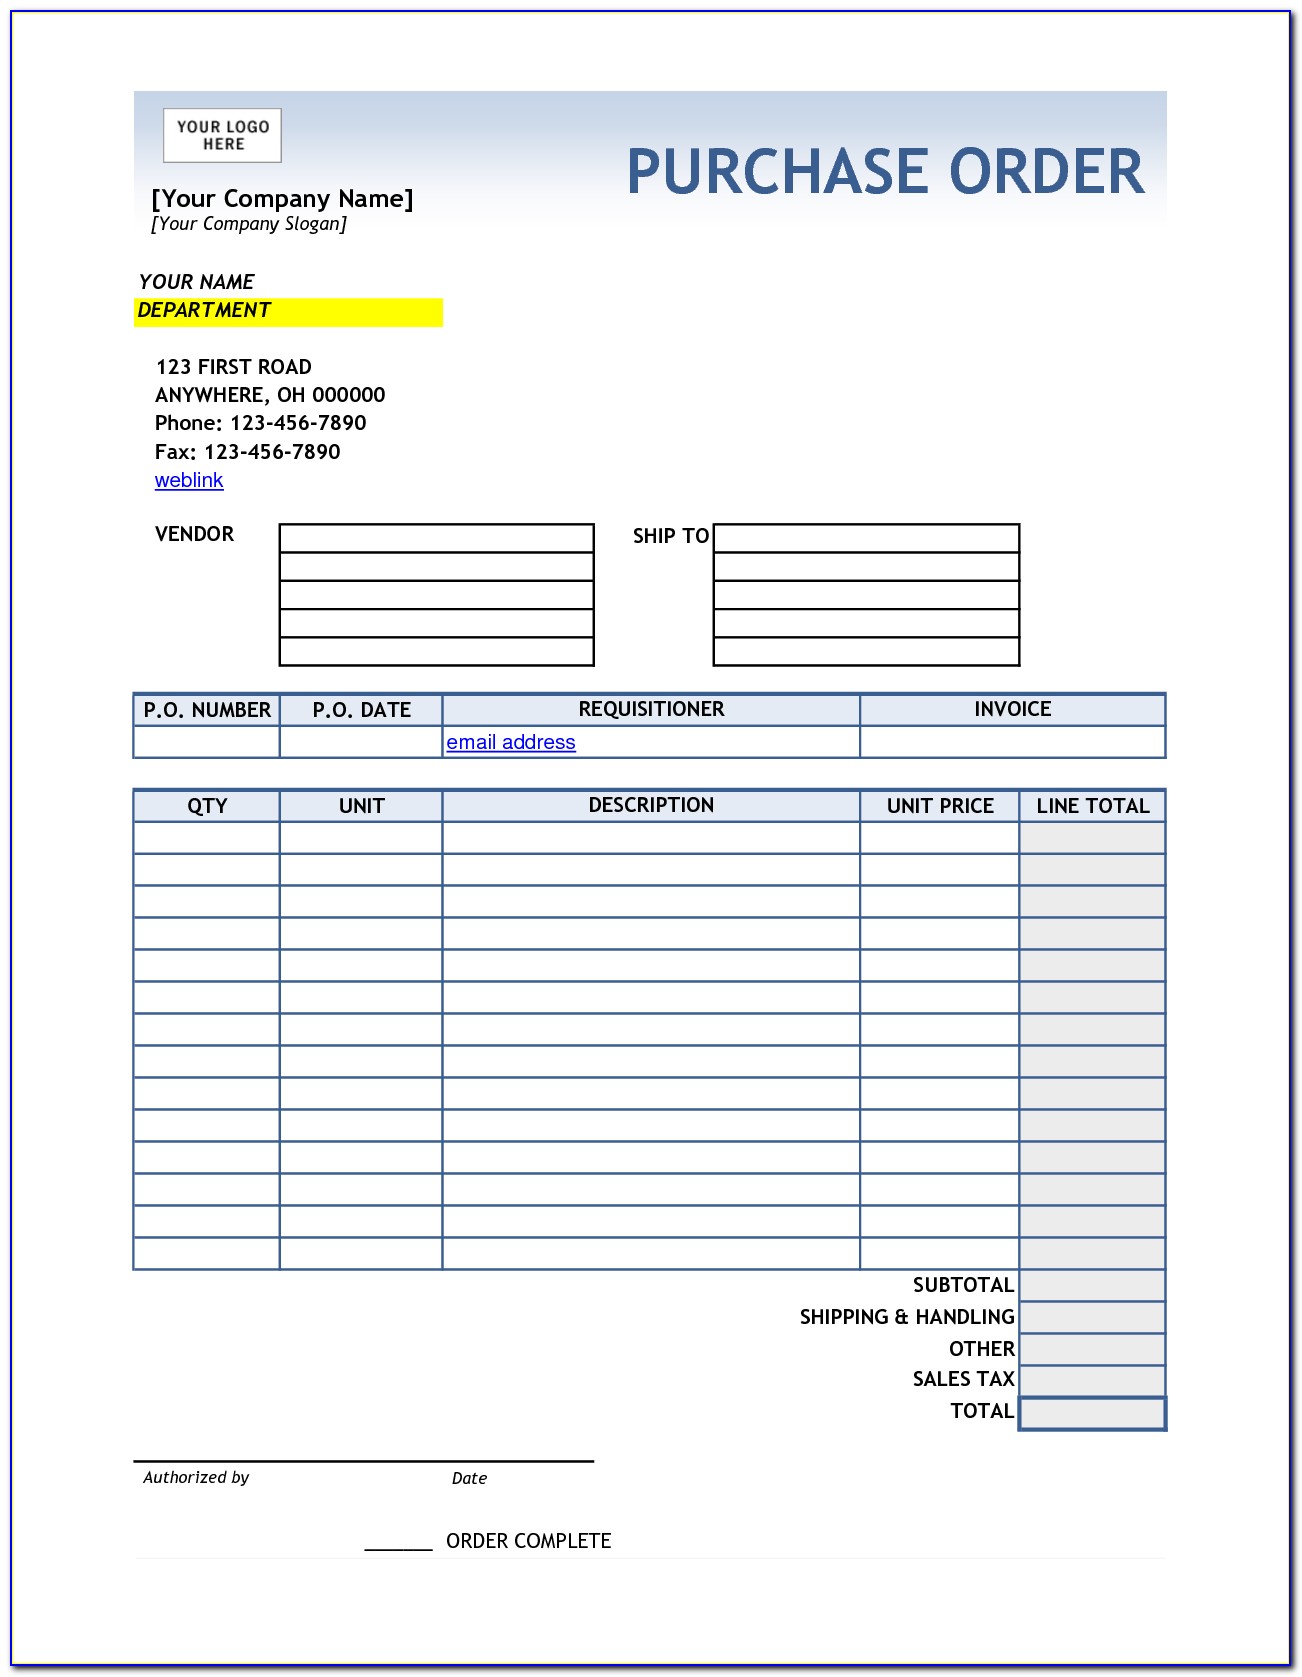 Purchase Order Sample Free Download